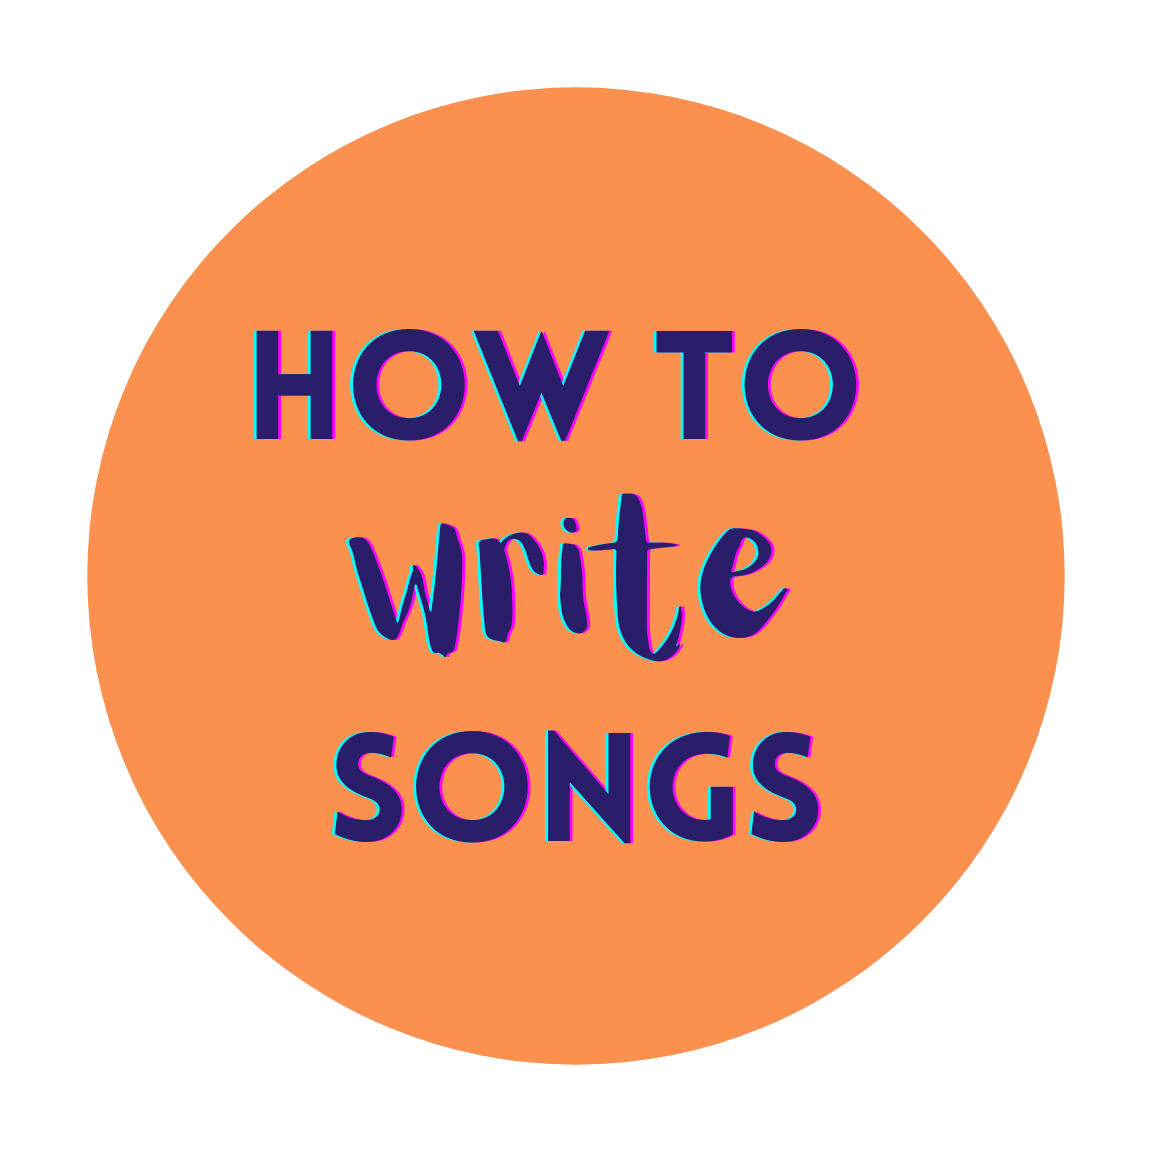 How to Write Songs